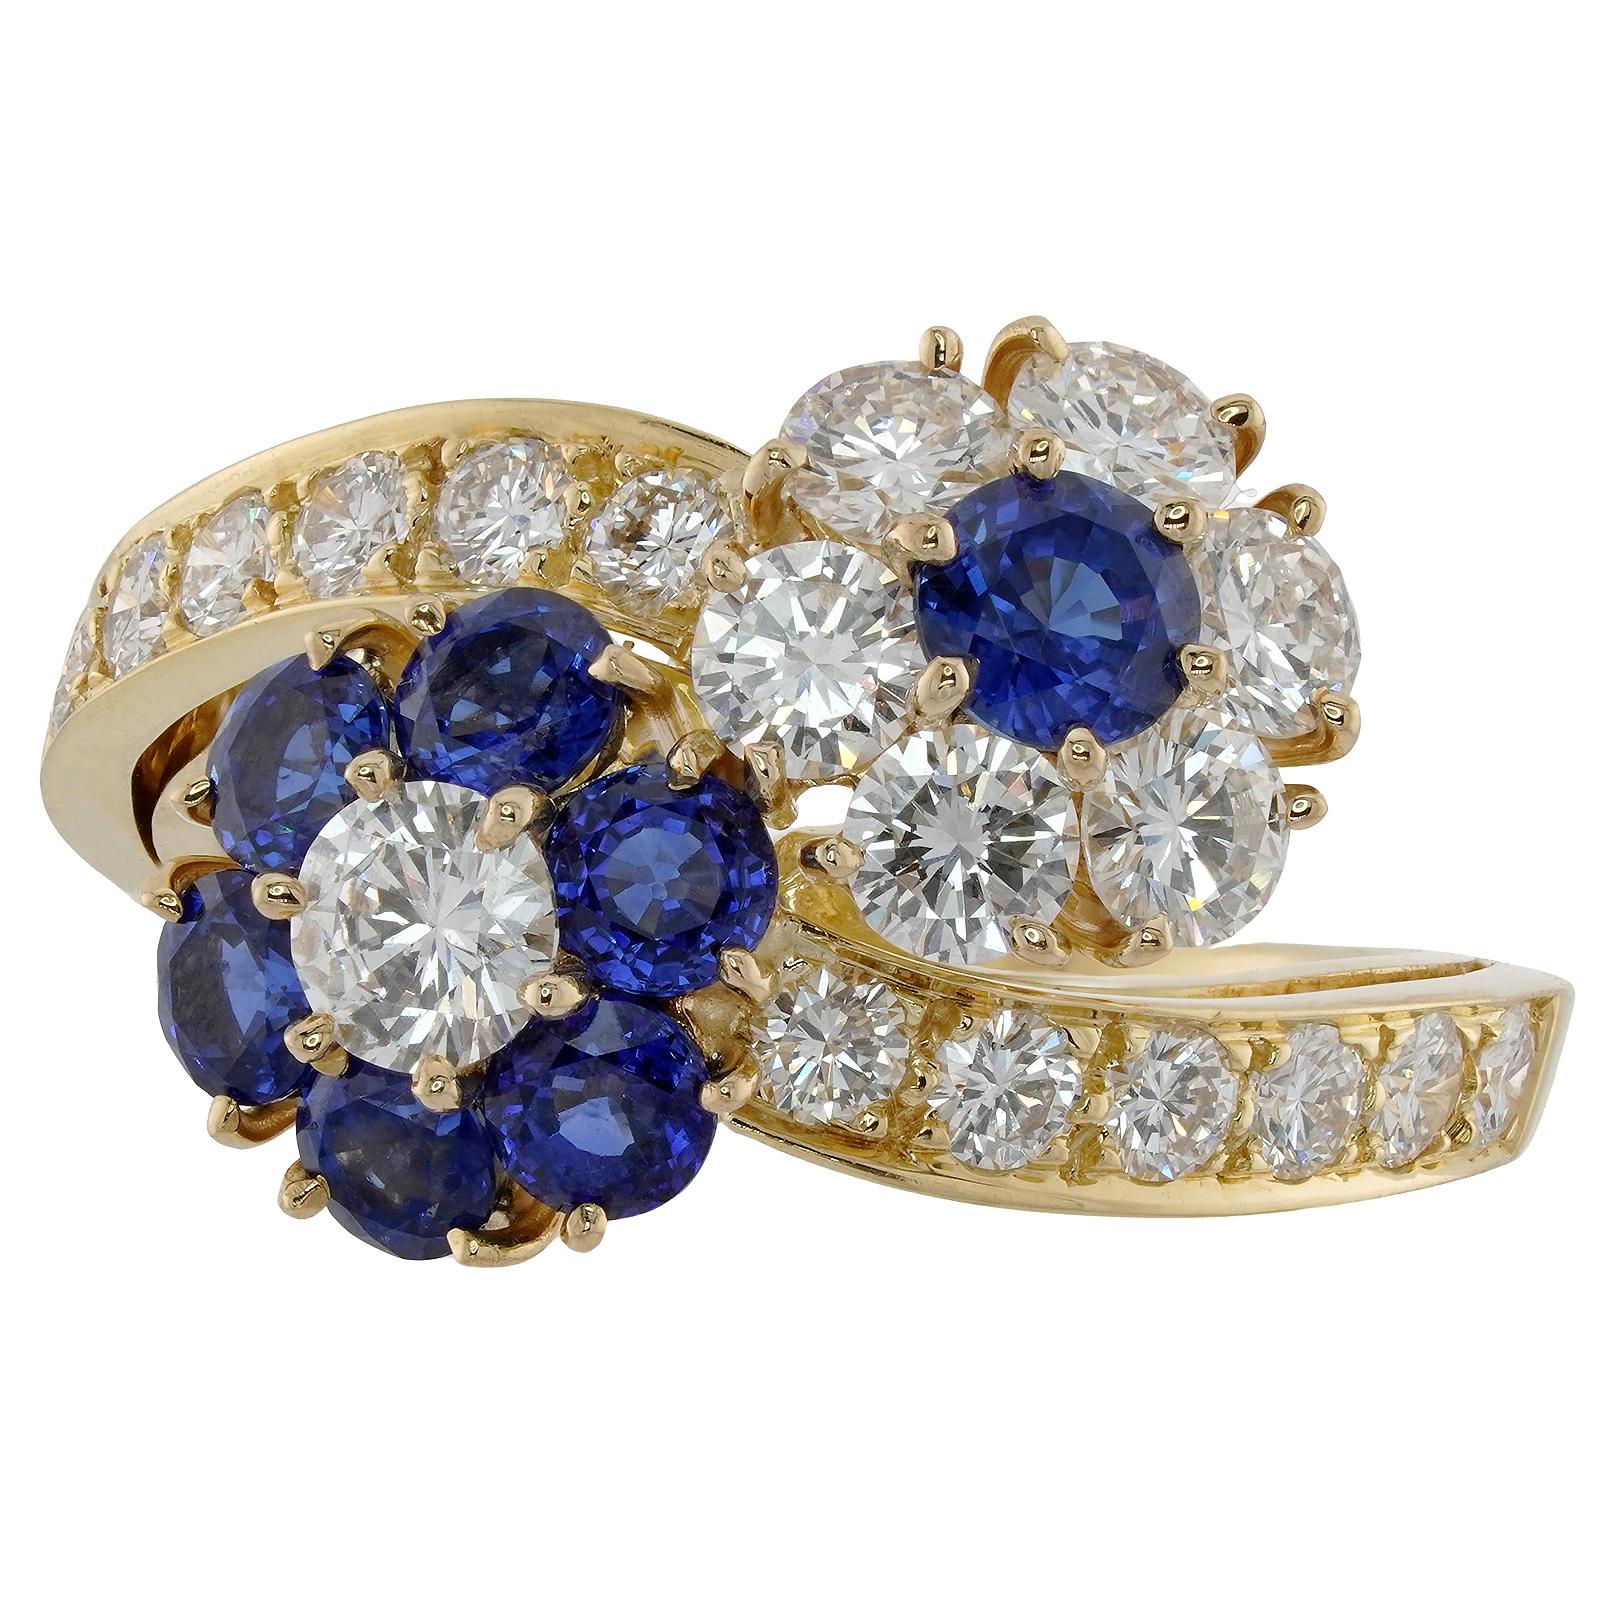 VAN CLEEF & ARPELS Fleurette Diamond Blue Sapphire Yellow Gold Flower Ring In Excellent Condition For Sale In New York, NY